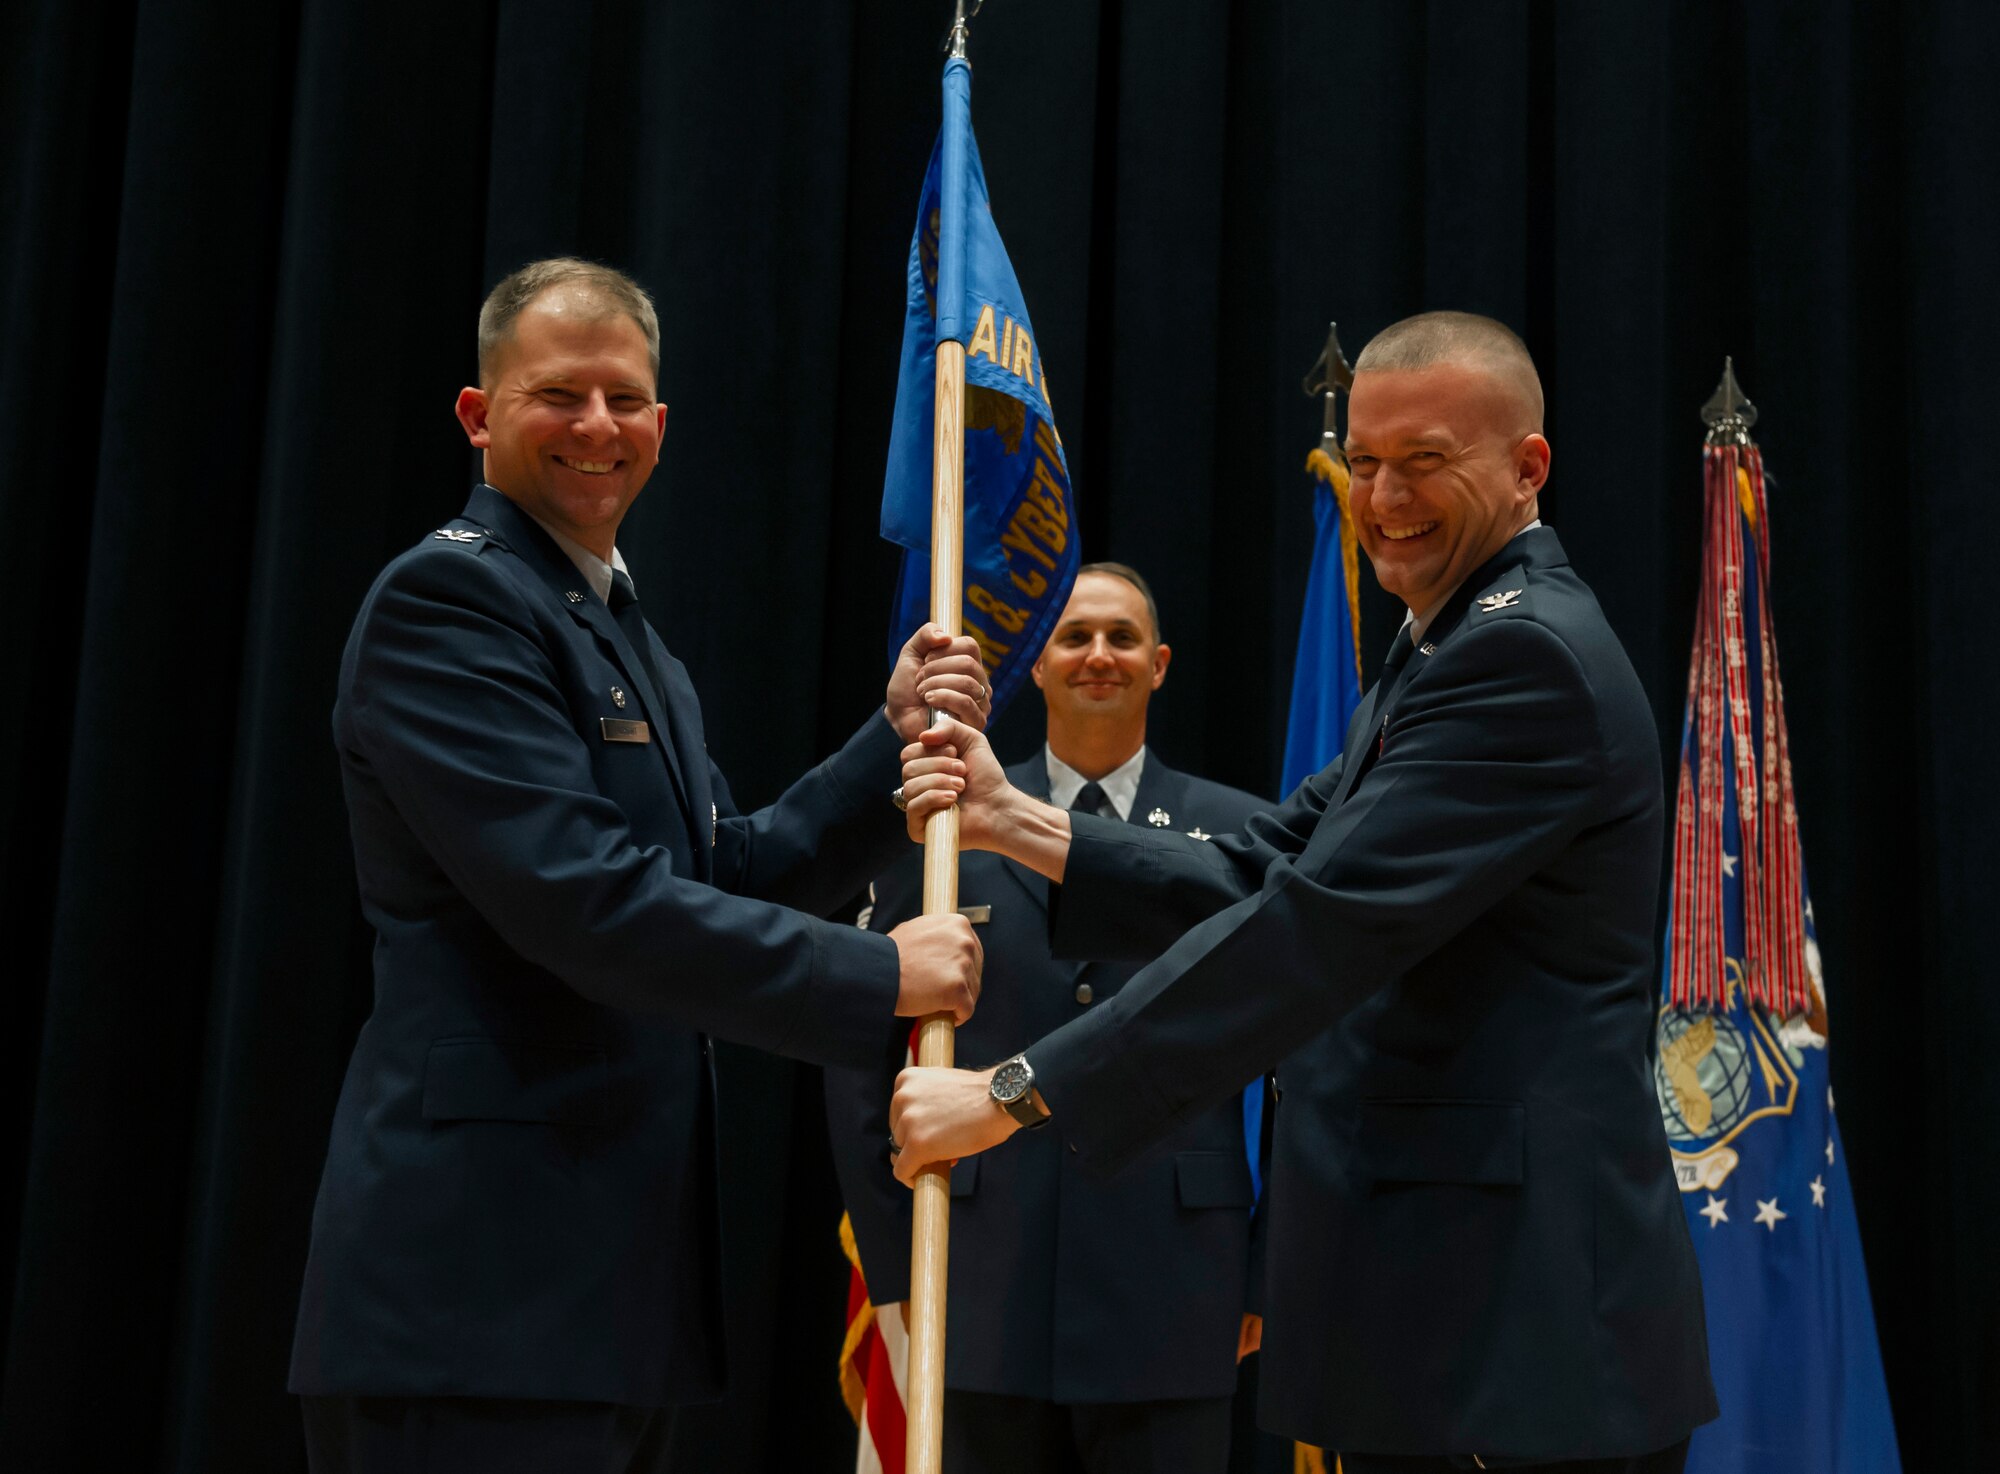 Col. William Fry accepts command of the National Air and Space Intelligence Center’s Air and Cyberspace Intelligence Group from Col. Parker Wright, NASIC commander, July 20. AC is responsible for the production of original intelligence assessments on foreign air systems, electronics, directed energy, integrated air defense, and cyberspace systems supporting the warfighter, national policy makers and the acquisitions community. (U.S. Air Force photo/ Senior Airman Jonathan Stefanko)